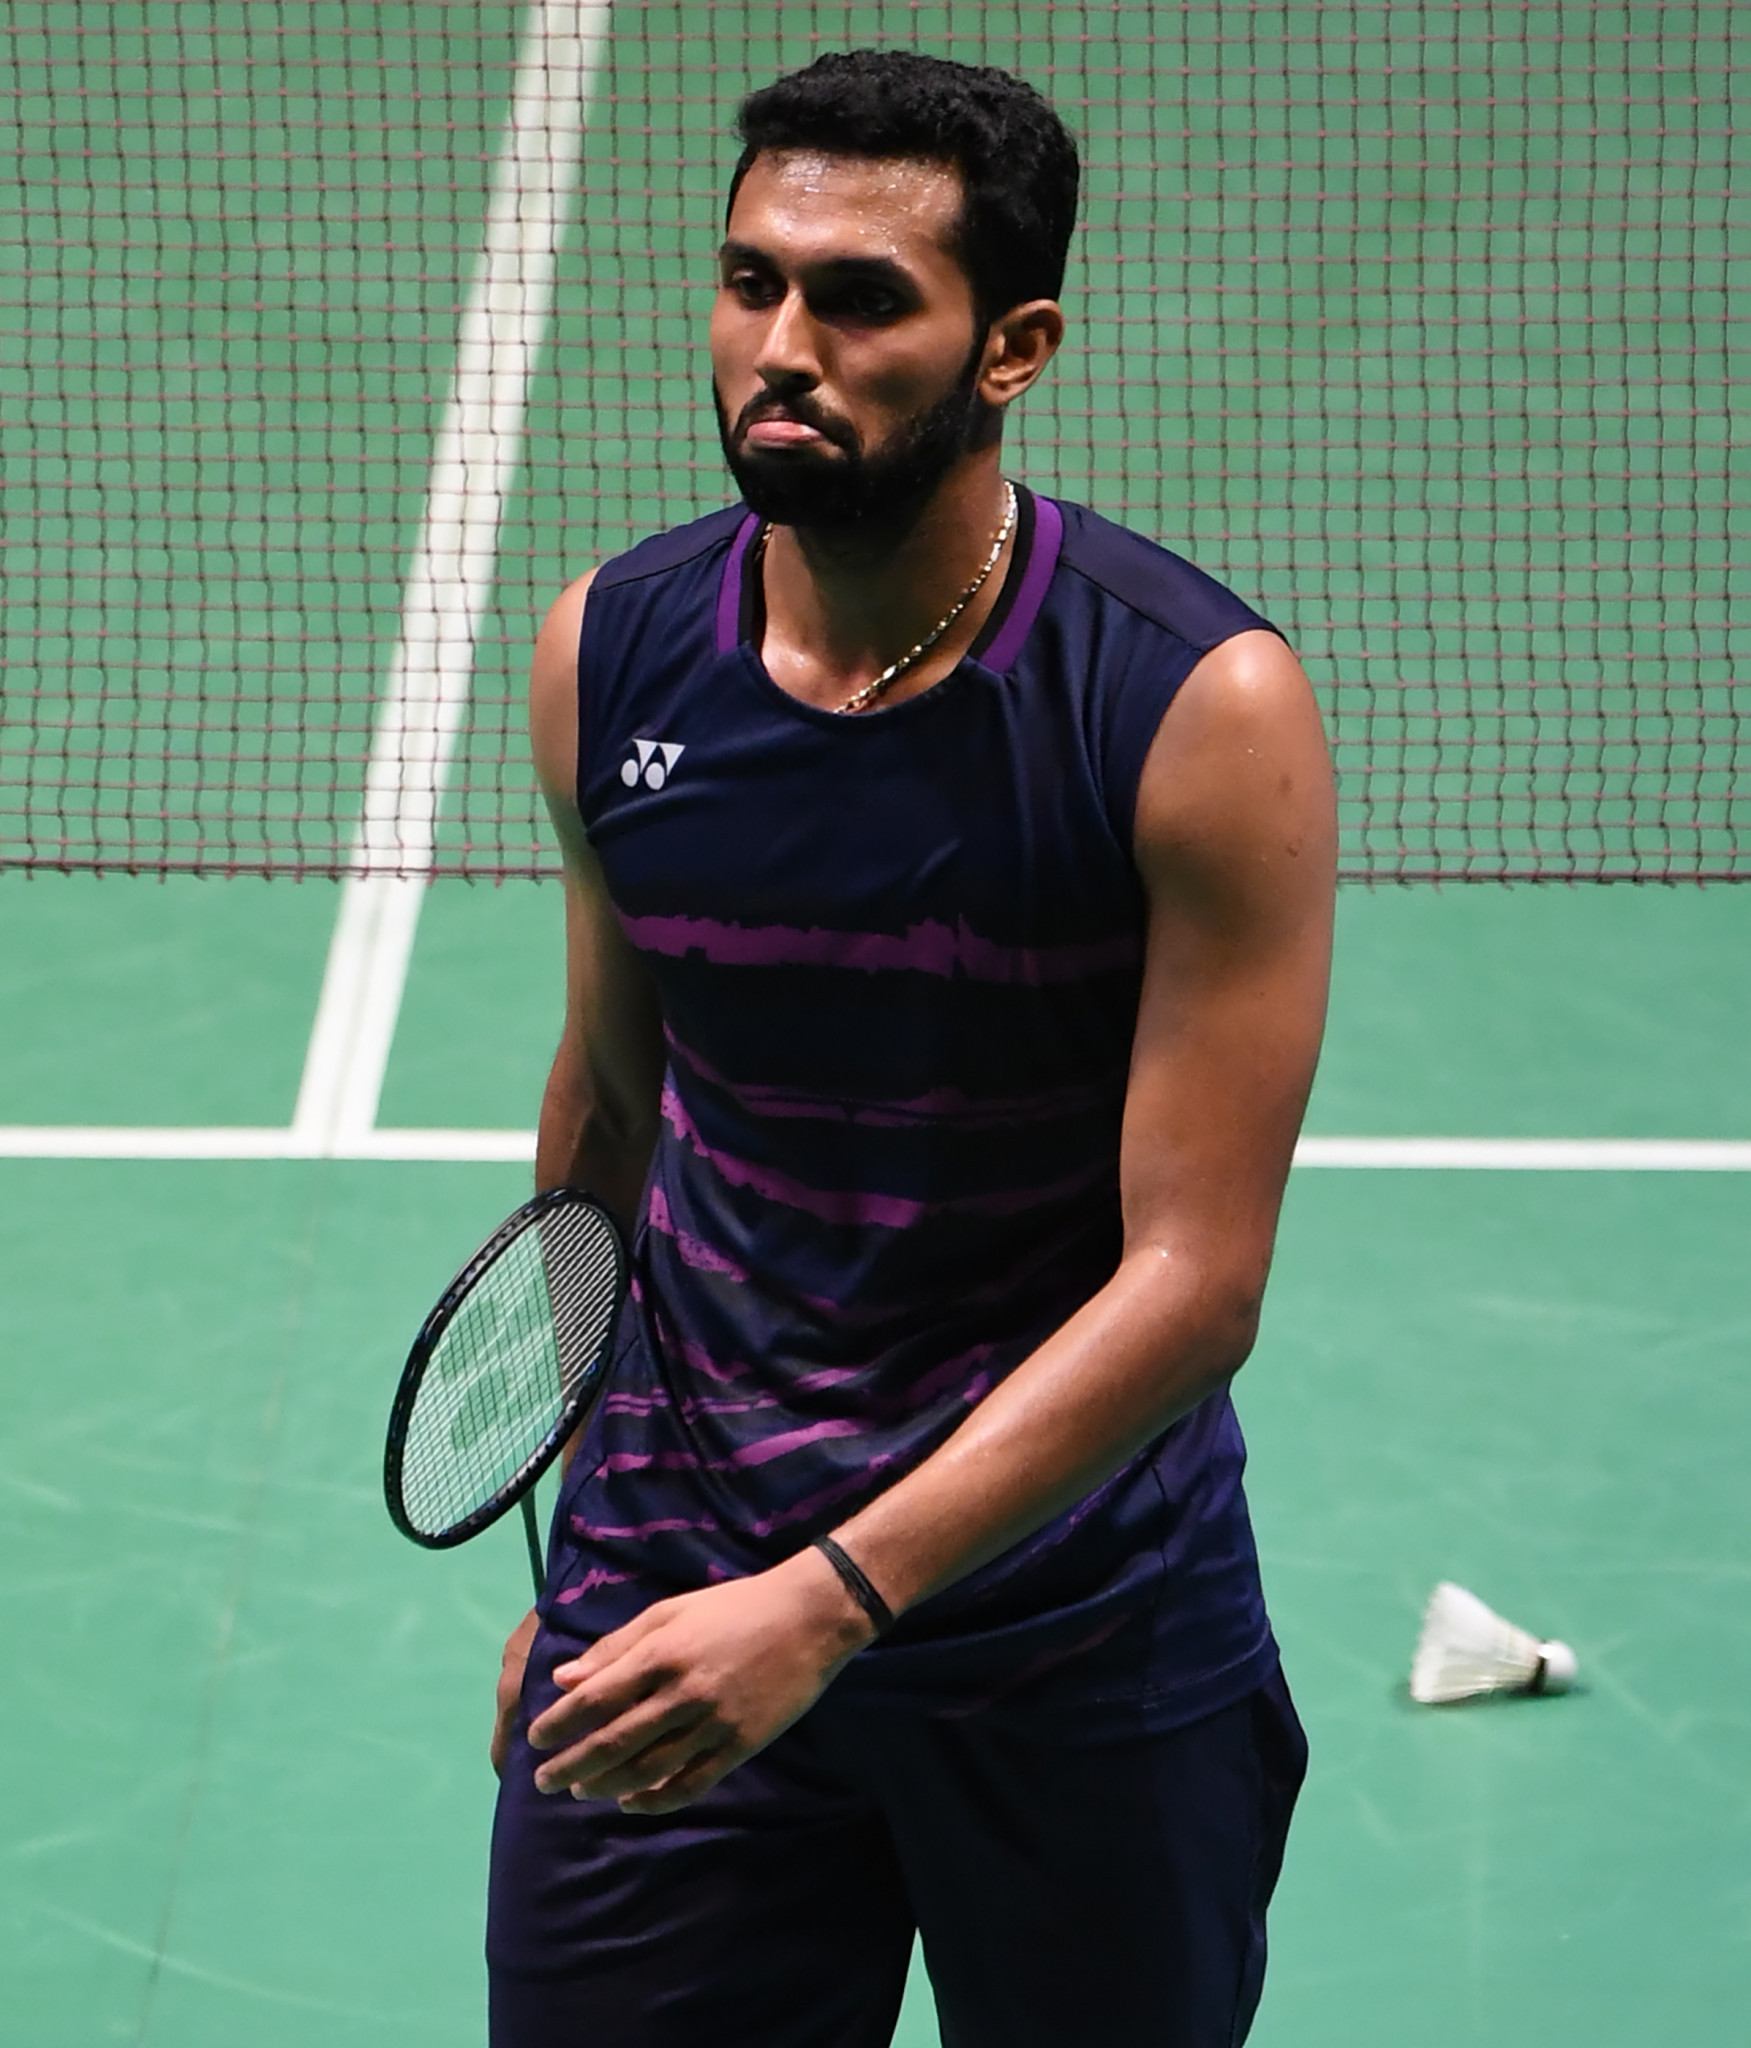 HS Prannoy of India is safely through to the last eight in Odense © Getty Images